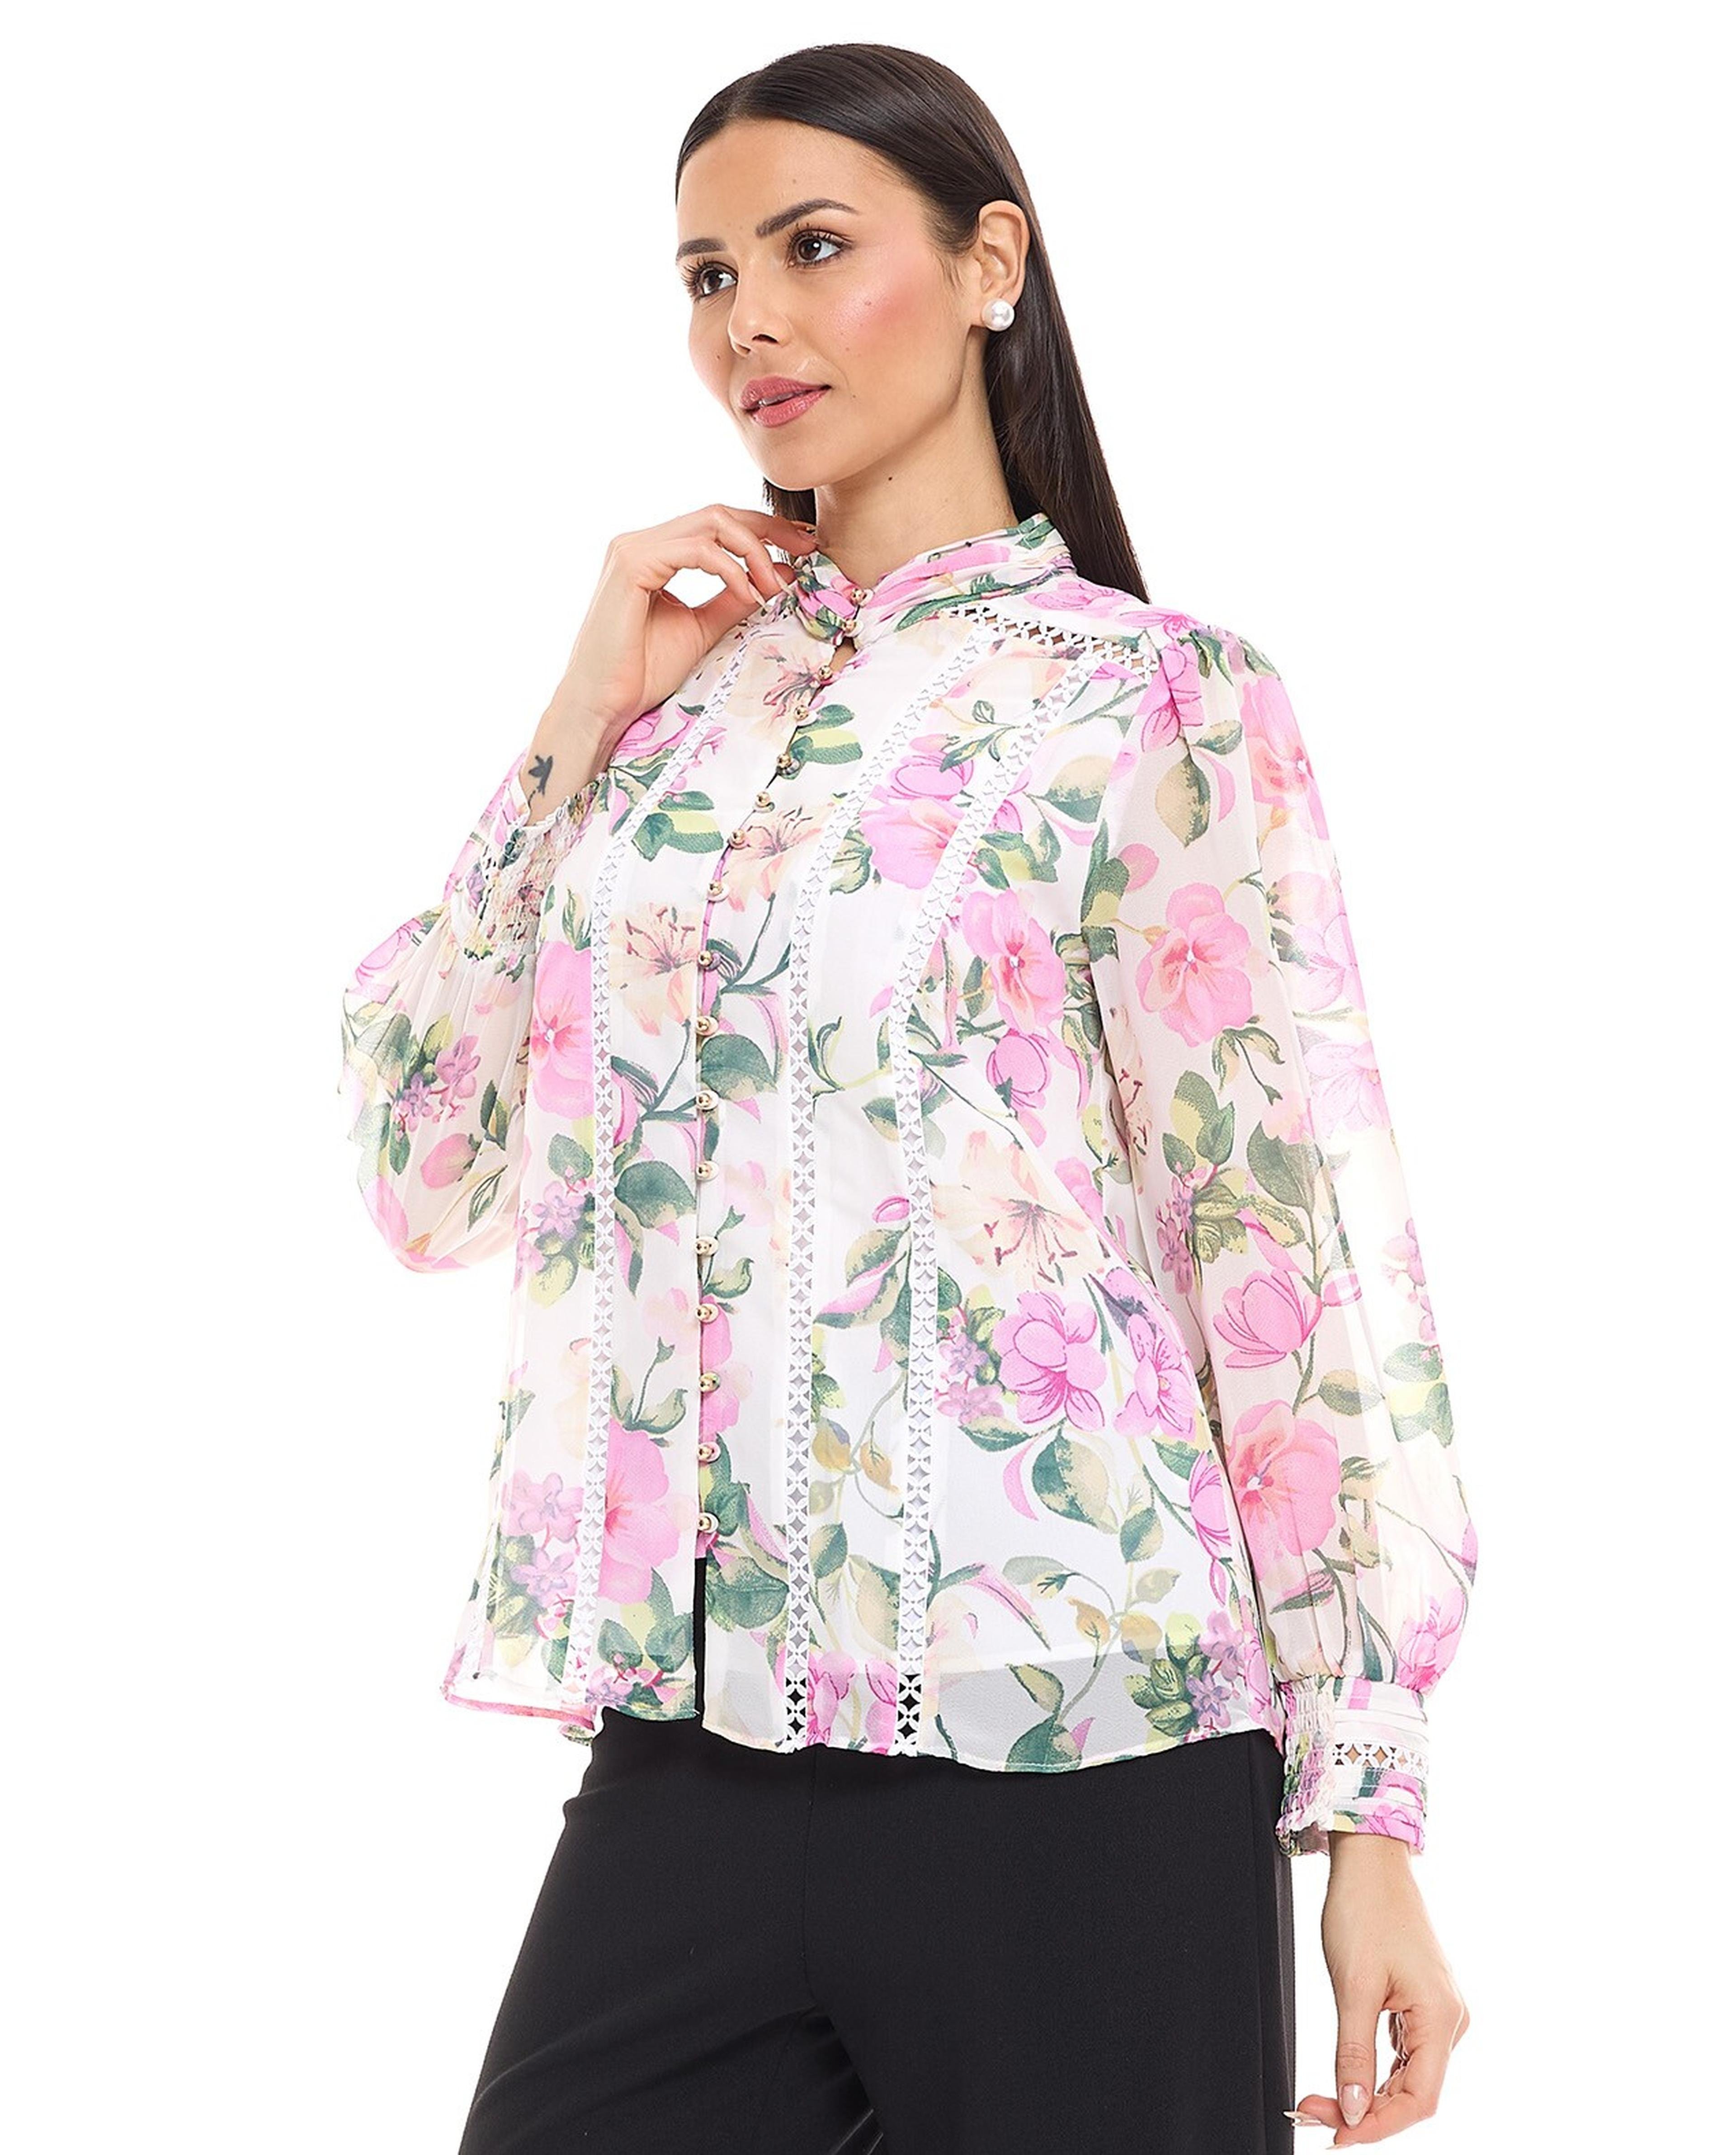 Floral Print Top with High Neck and Bishop Sleeves